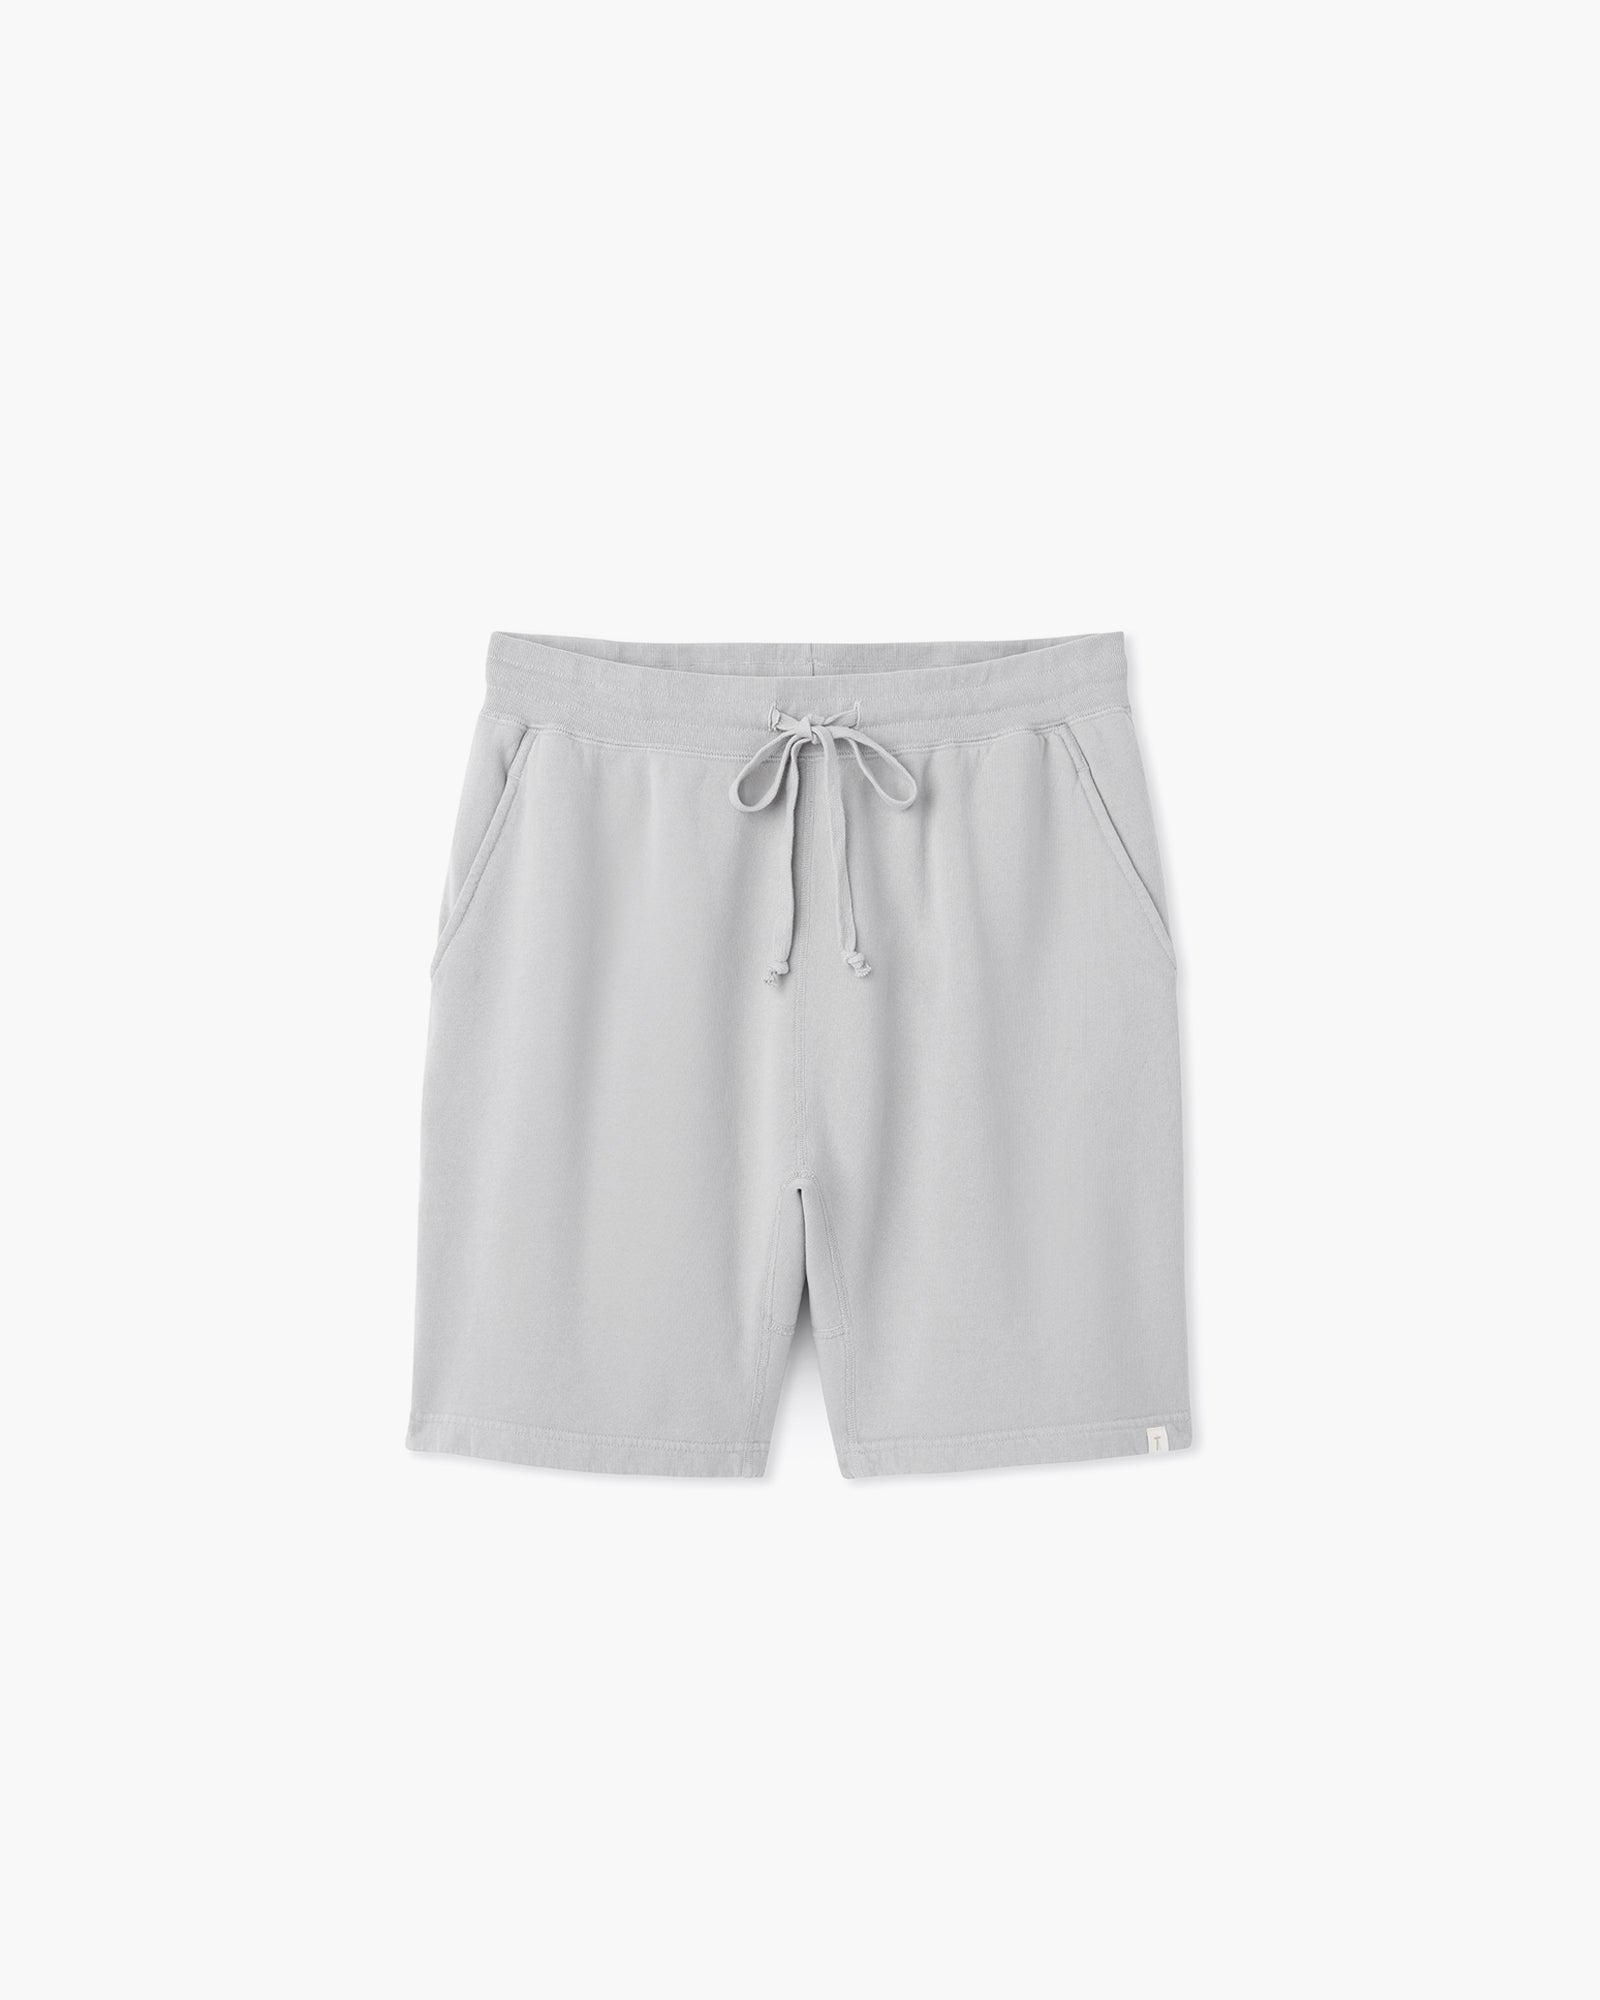 Grey Women's's's's's's's's's's's's's's's's's's's's's's TKEES Core Shorts | UPCRBT582